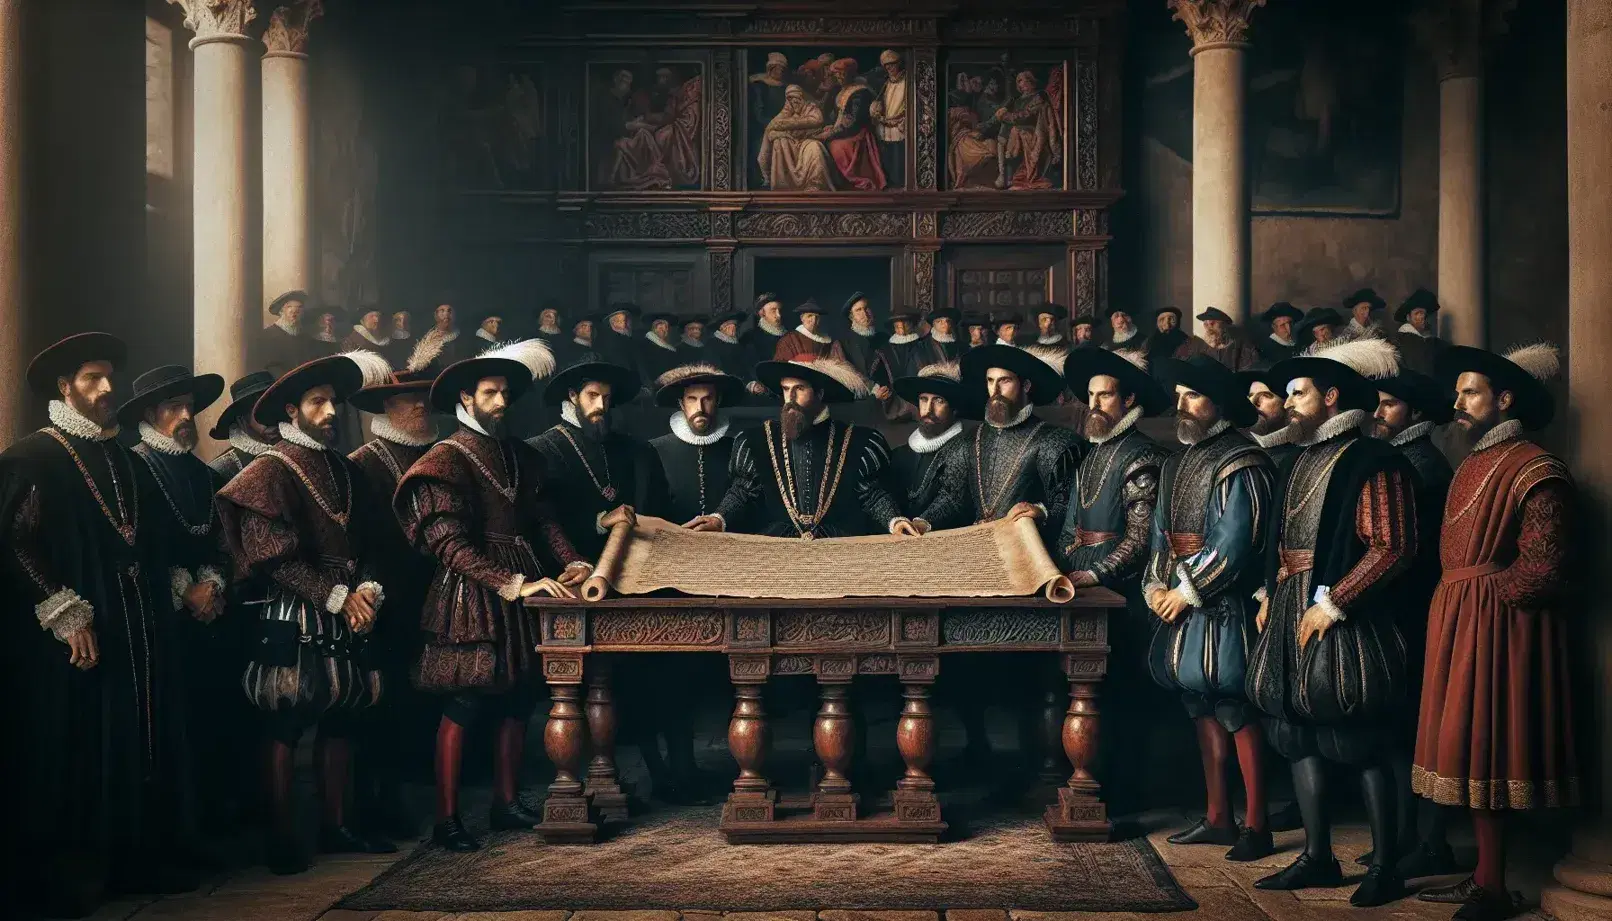 Late 15th-century historical reenactment with Spanish and Portuguese delegates in period attire, signing a document on a carved wooden table, in a tapestried room.